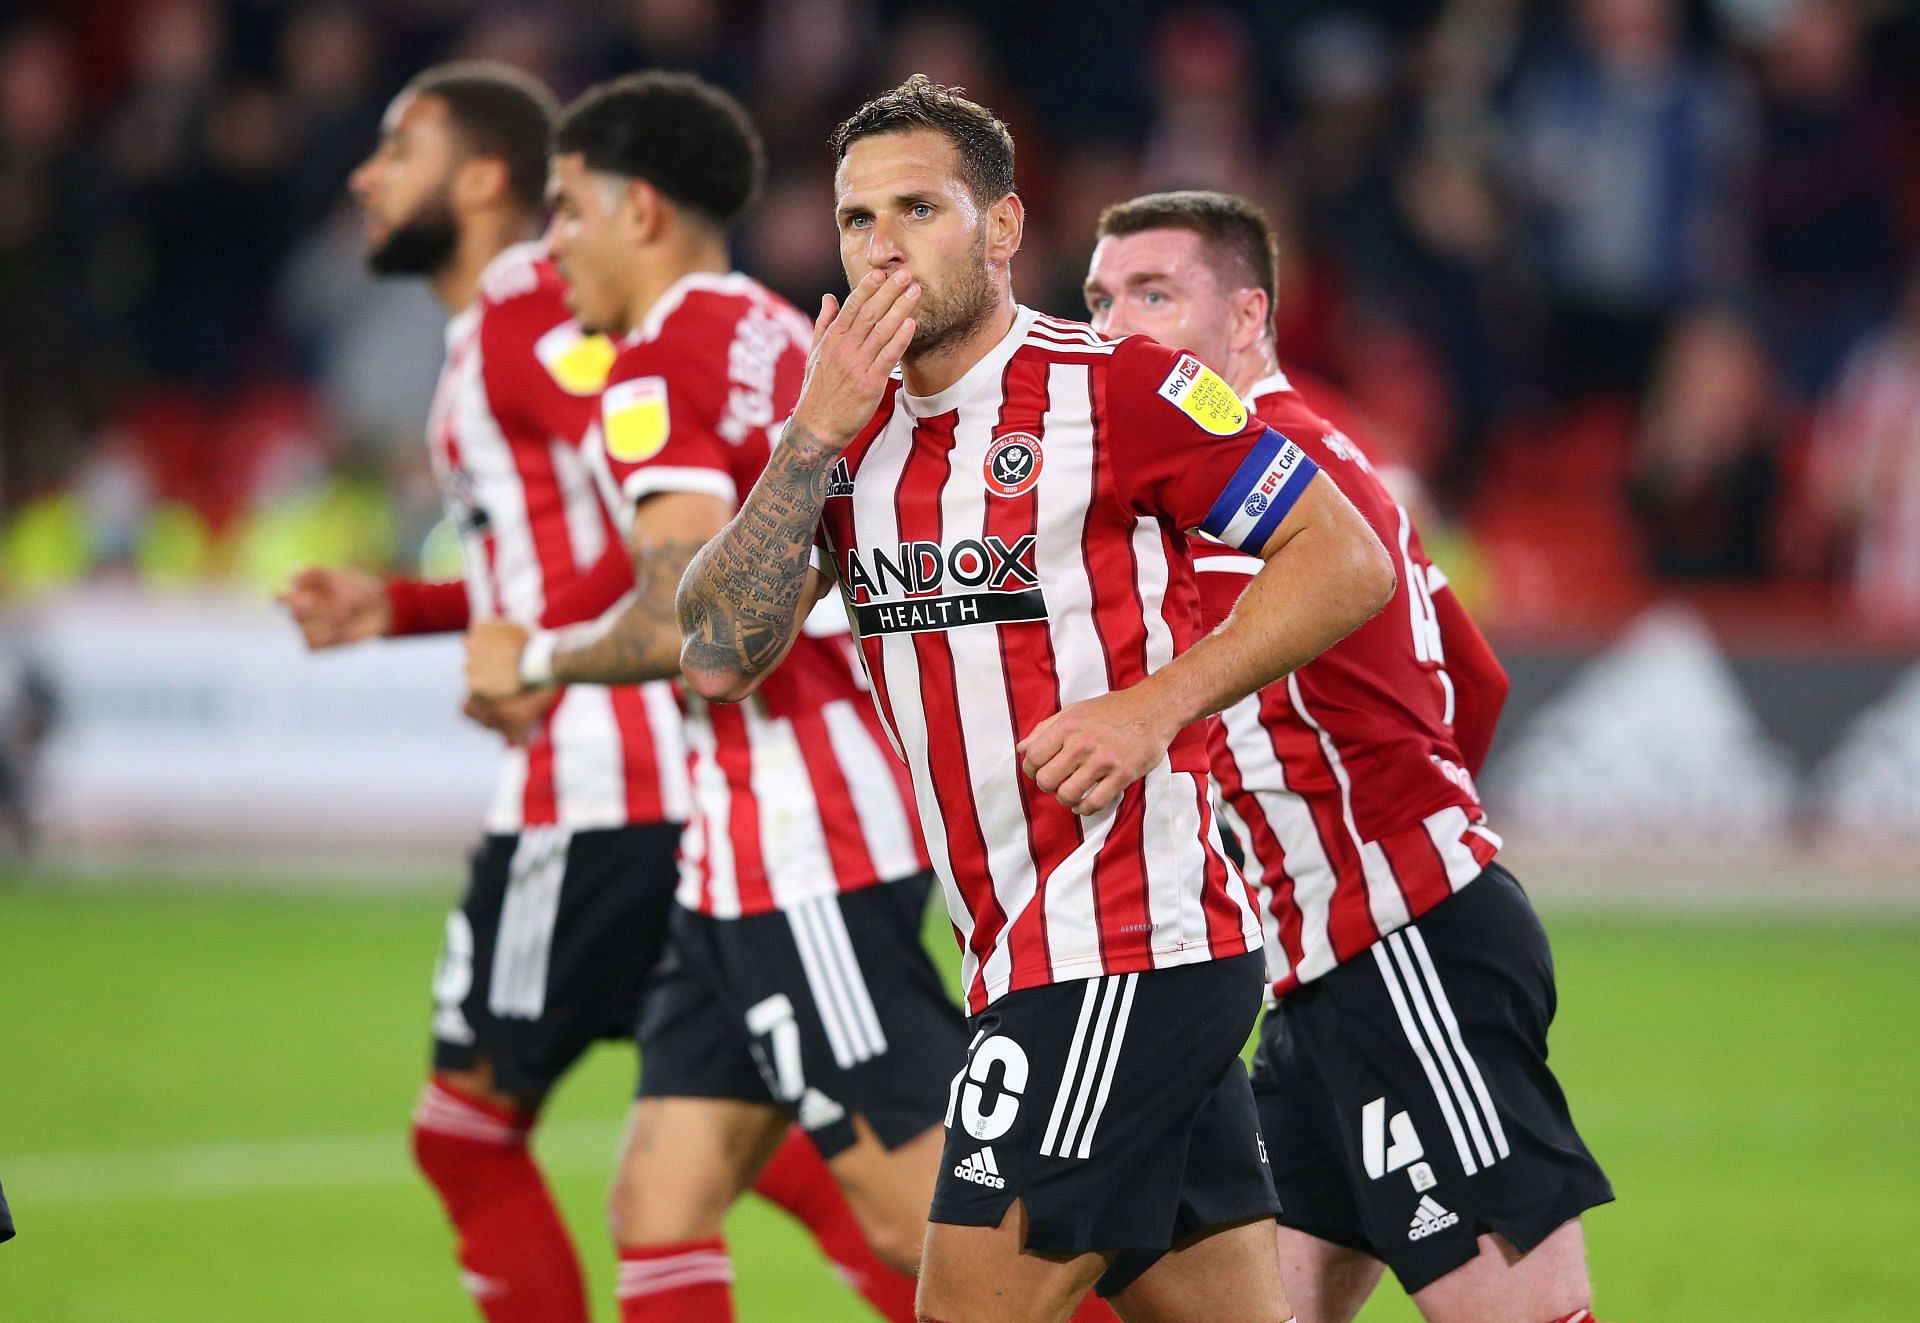 Sheffield United are looking to climb up the table